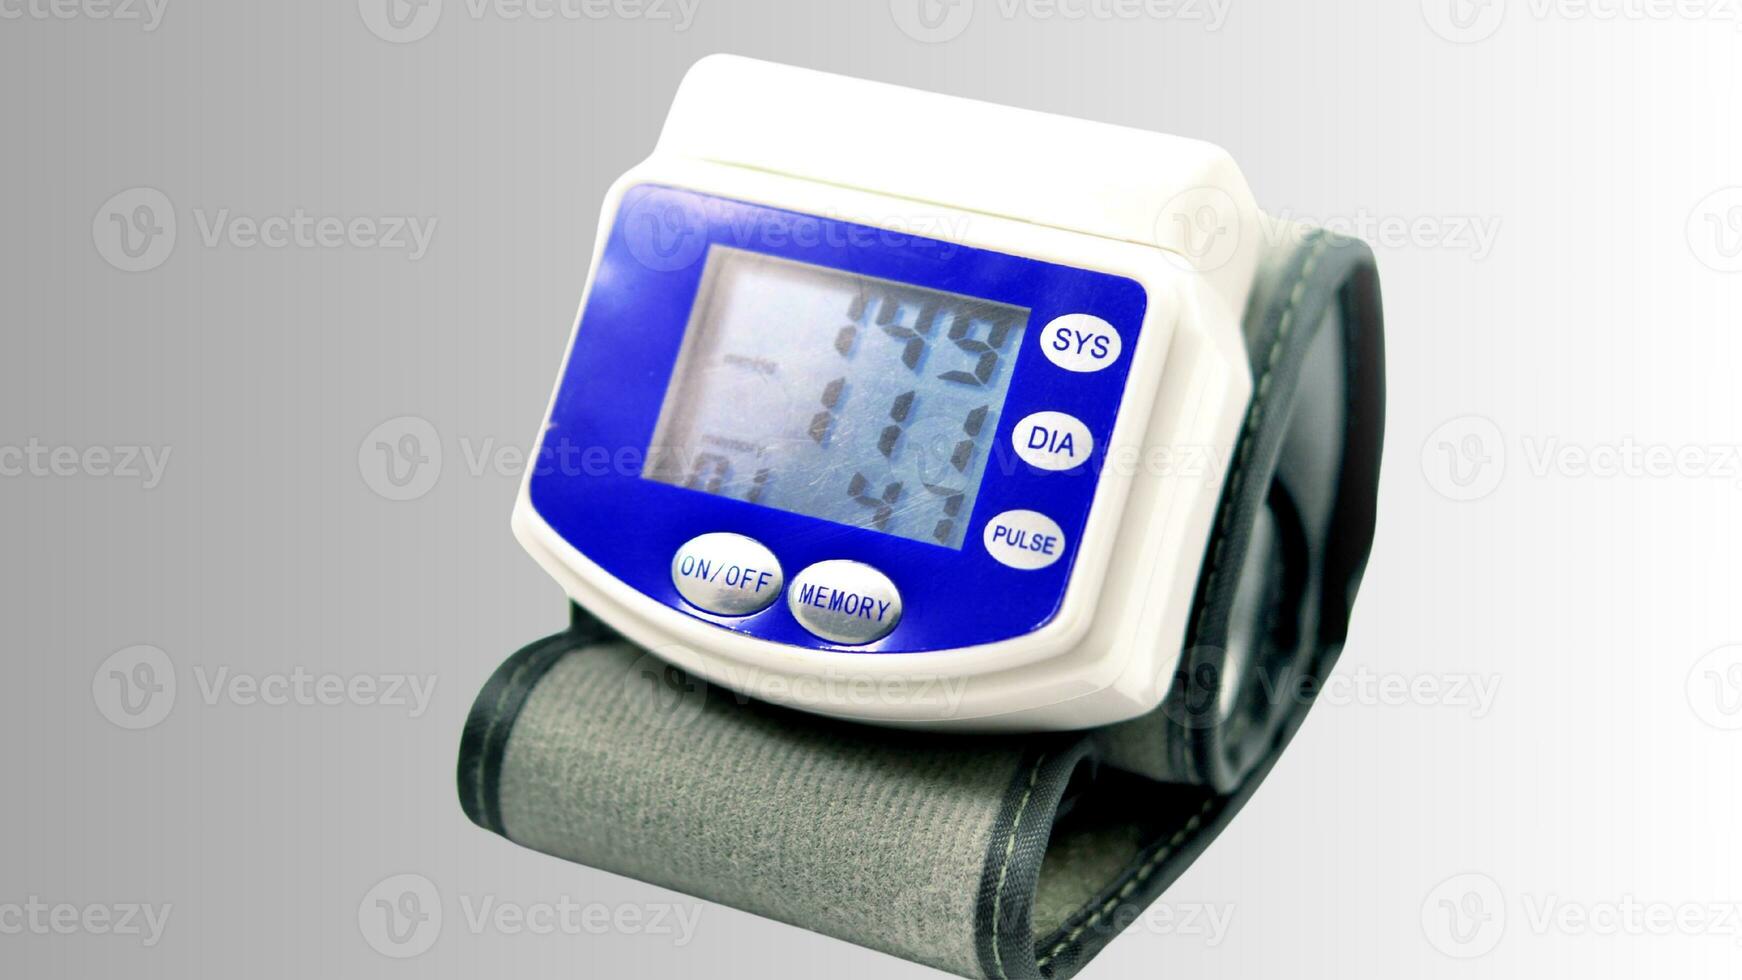 Isolated Blood Pressure Meter on White Background, Healthcare Monitoring Equipment photo